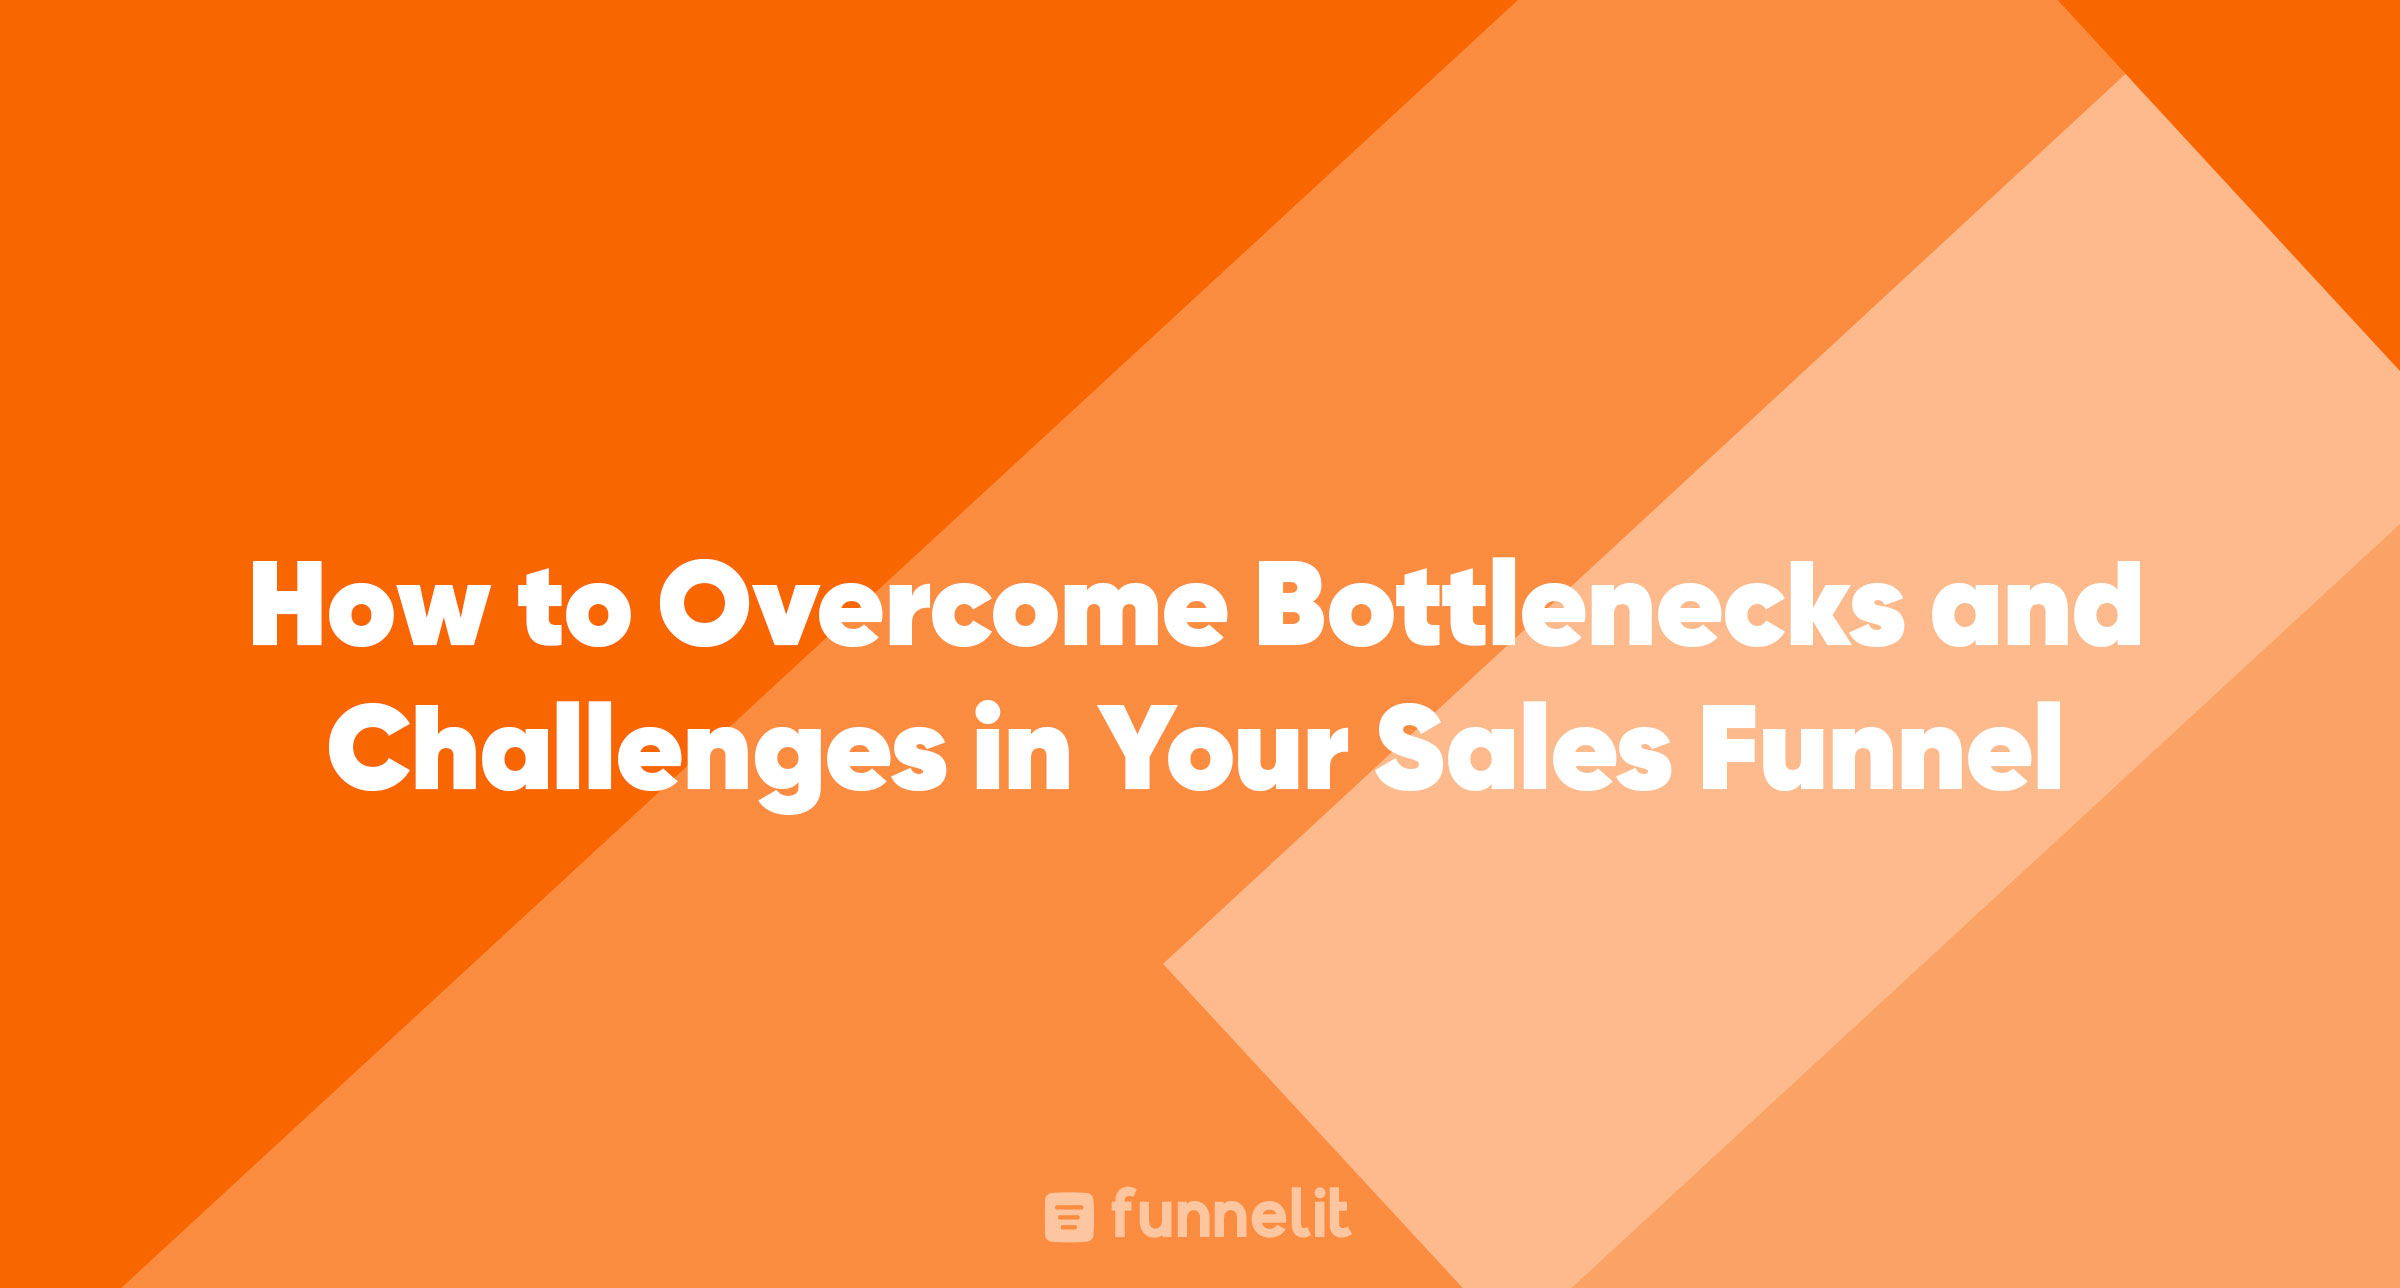 Article | How to Overcome Bottlenecks and Challenges in Your Sales Funnel